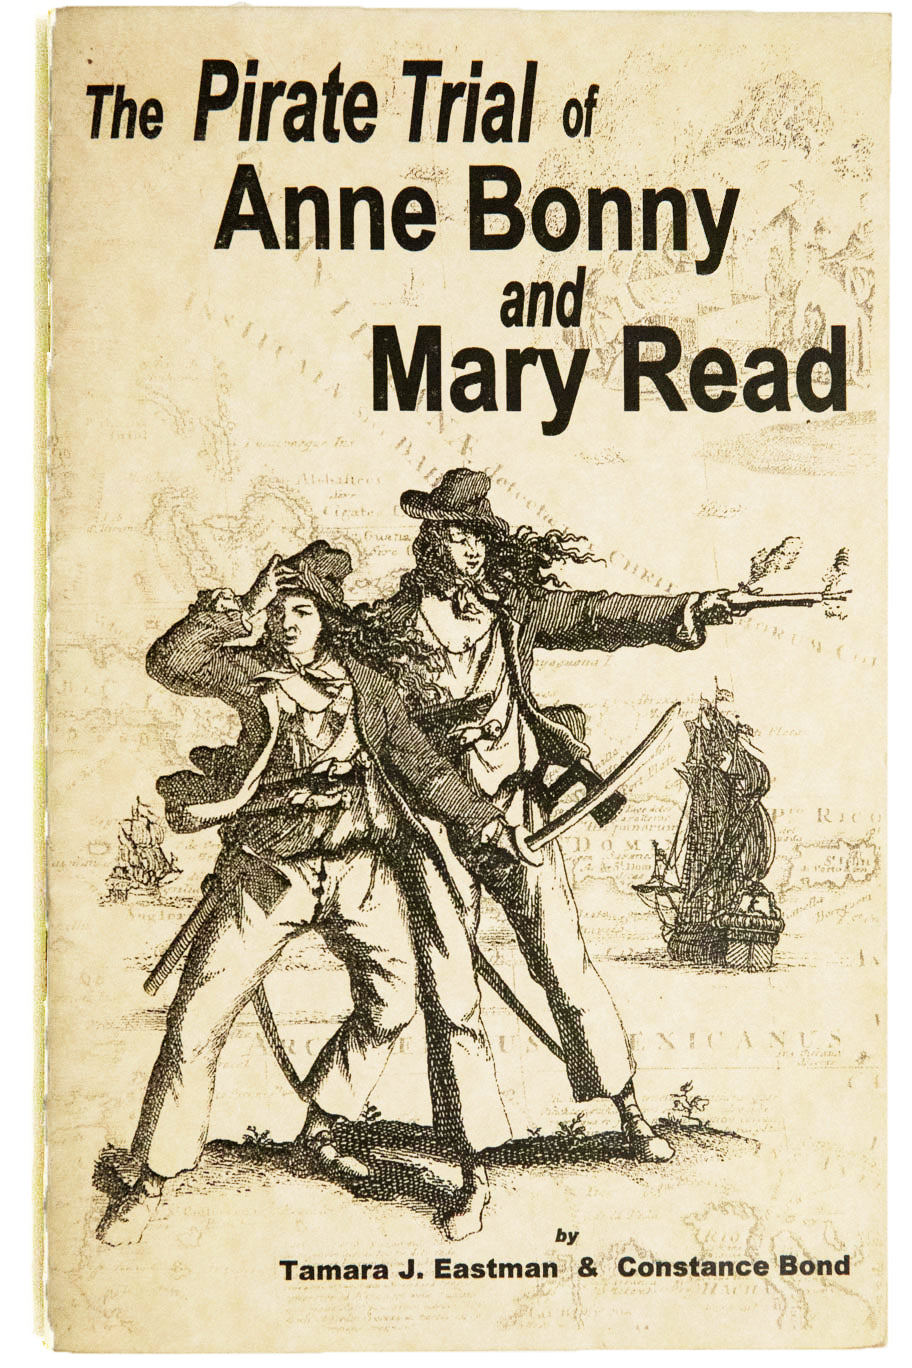 THE PIRATE TRIAL OF ANNE BONNY AND MARY READ